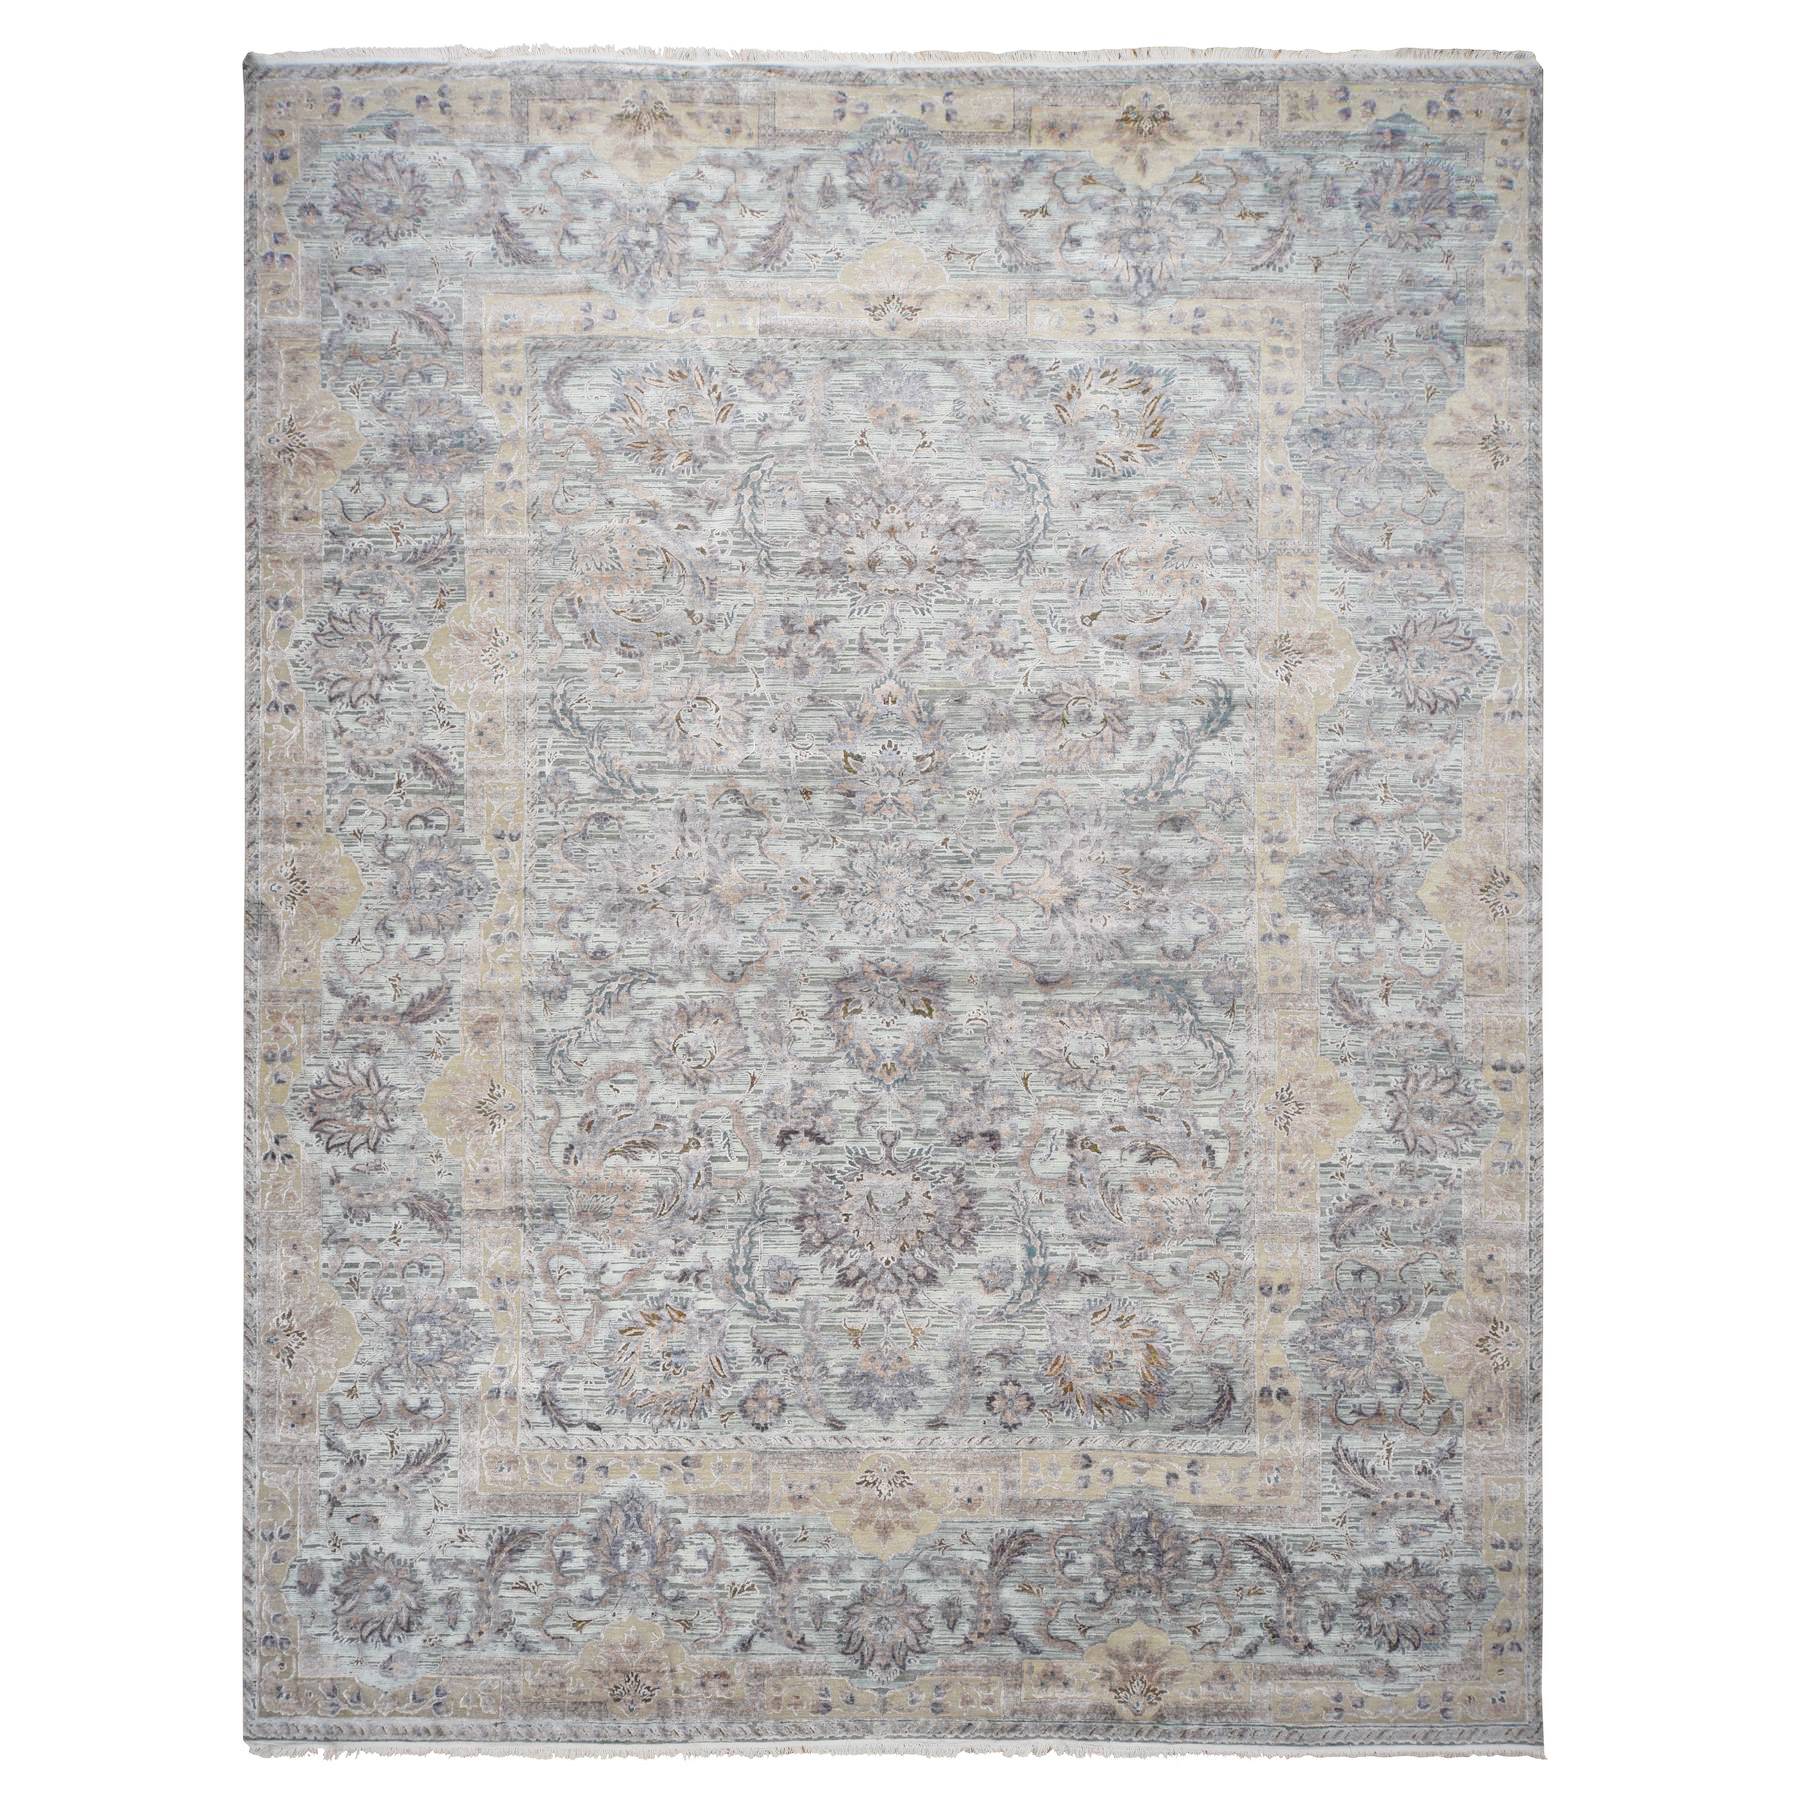 Transitional Rugs LUV791937